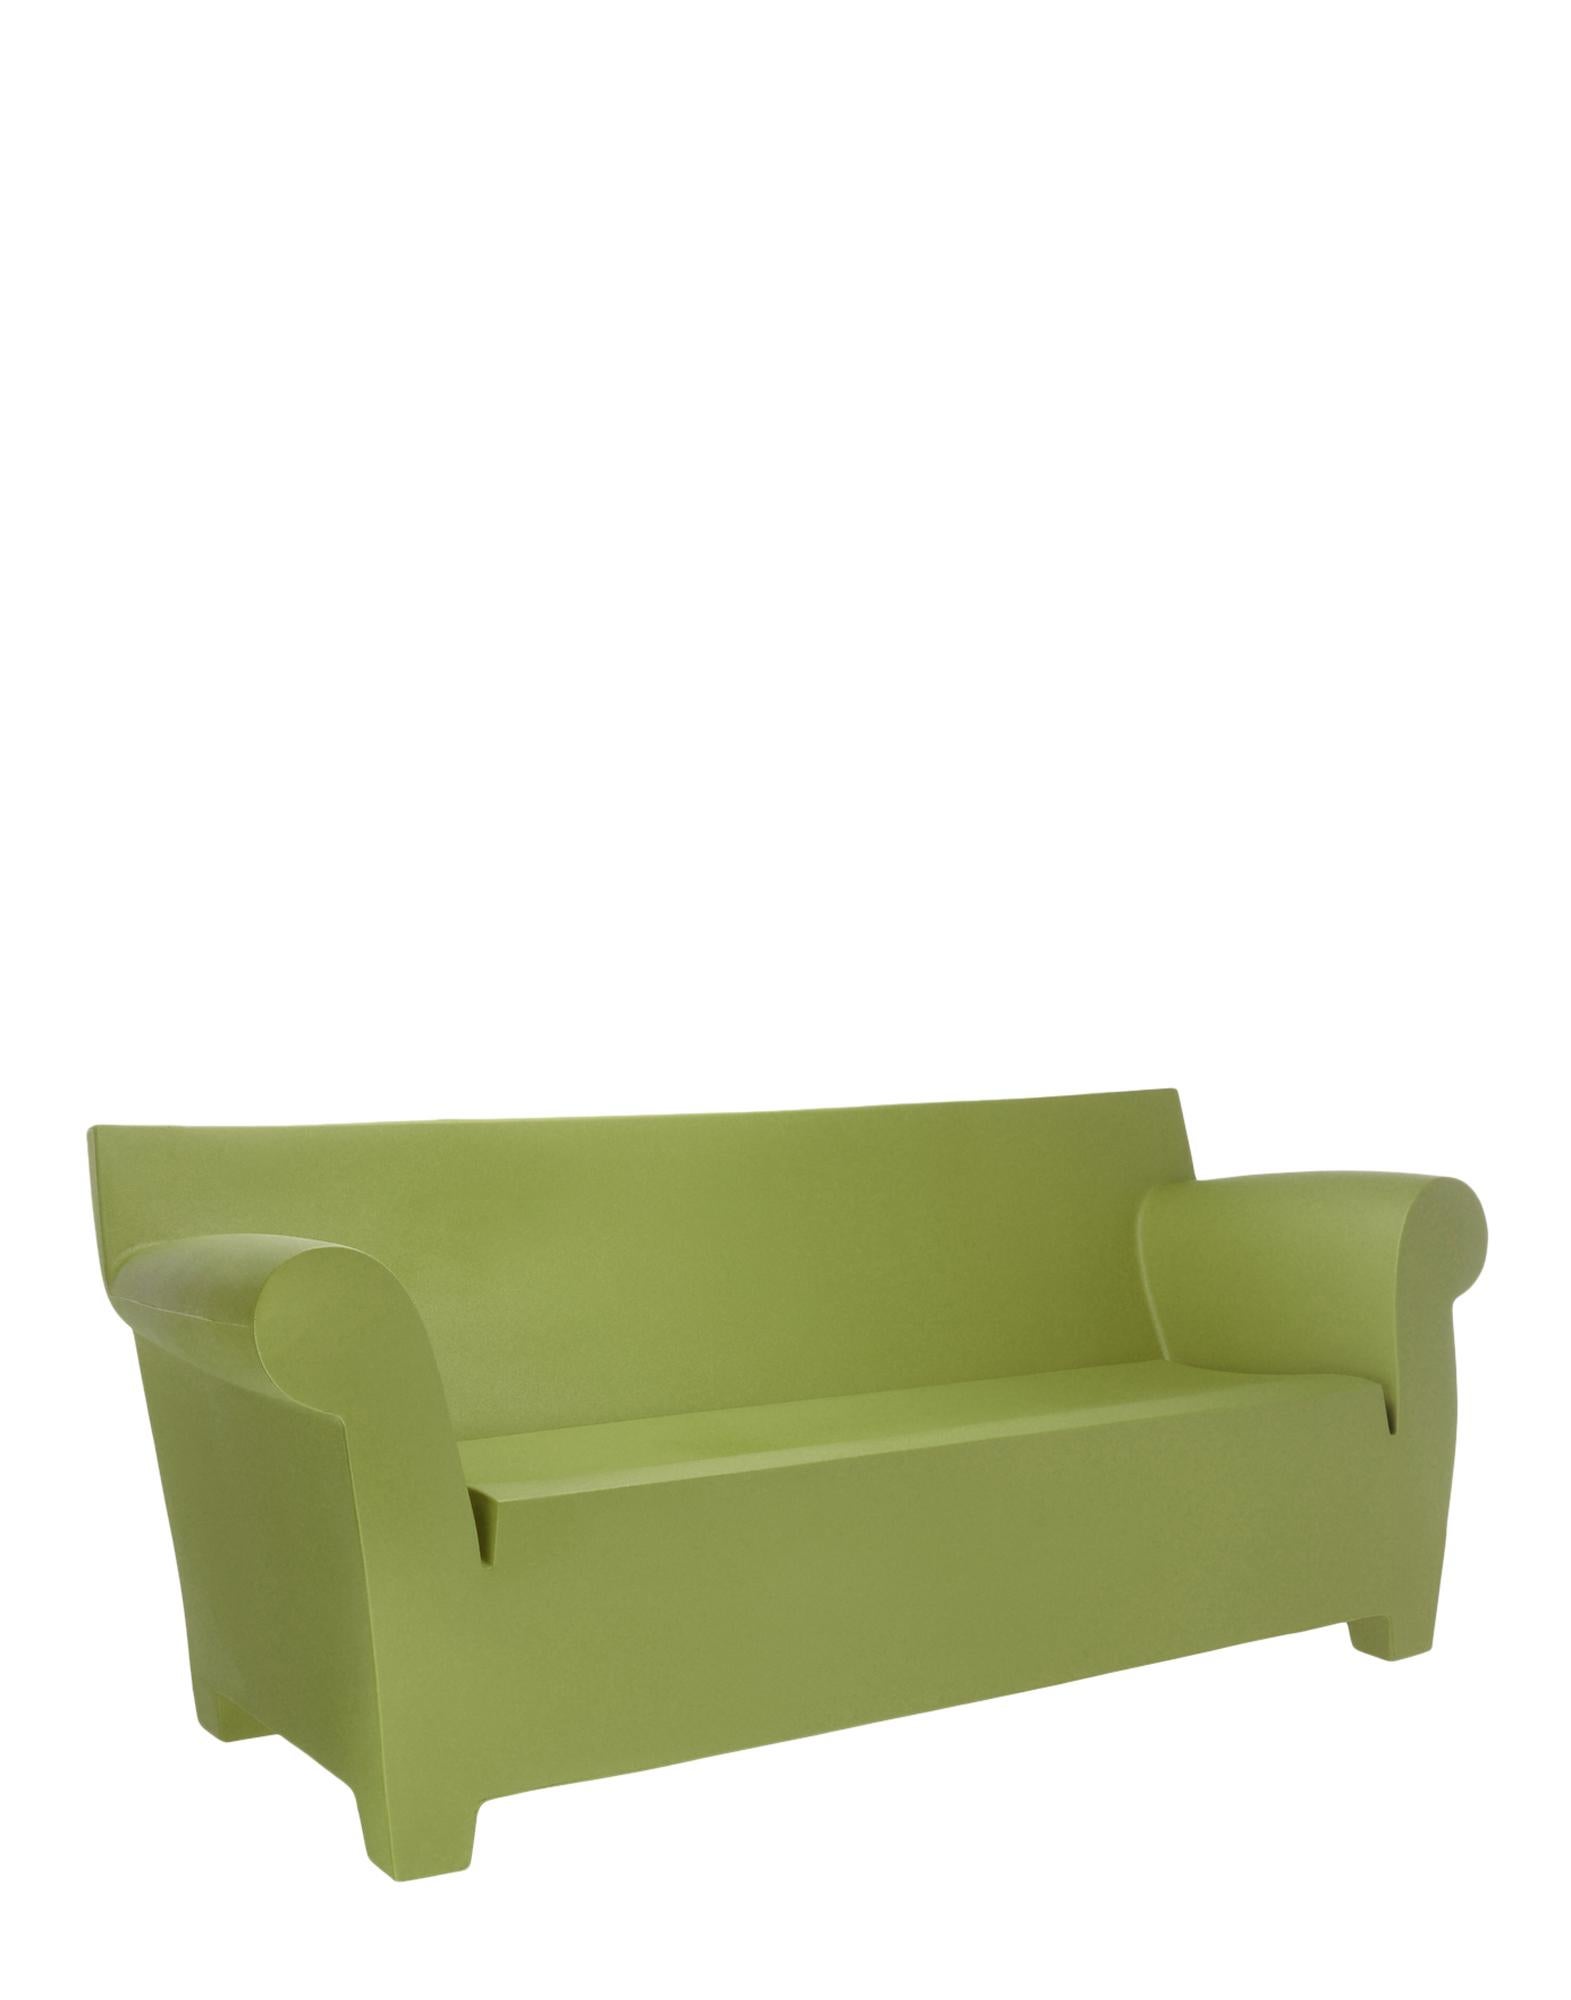 A veritable icon made by Kartell, the mass-tinted polypropylene Bubble club sofa was a Pioneer of a new concept in furniture accessories: the Industrial sofa made entirely of plastic. Technology and research made it possible for Kartell to mass